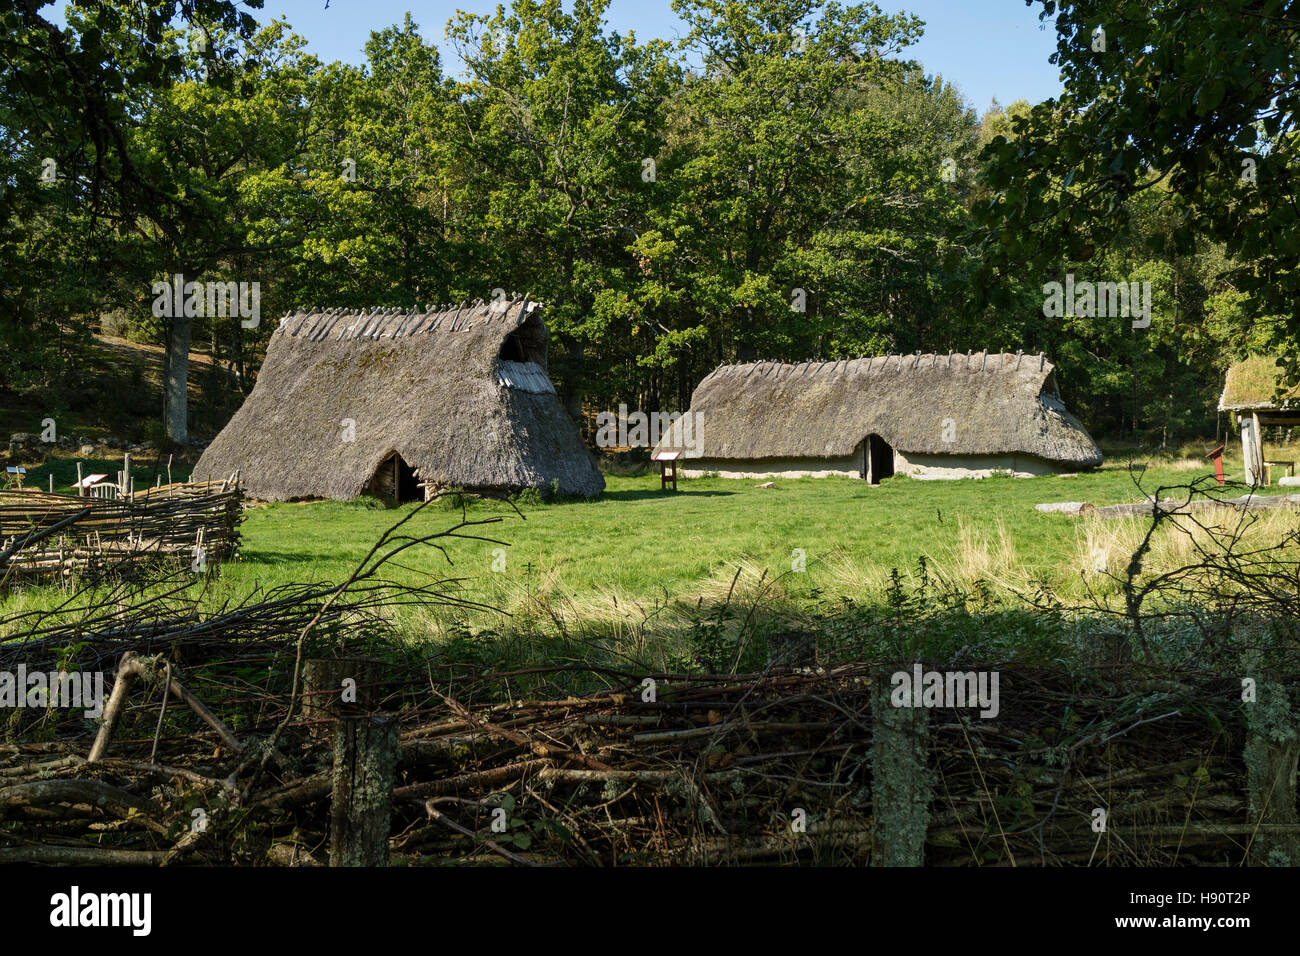 Replica of an old farmhouse from the bronze century in the Tanum world heritage center, Sweden Stock Photo